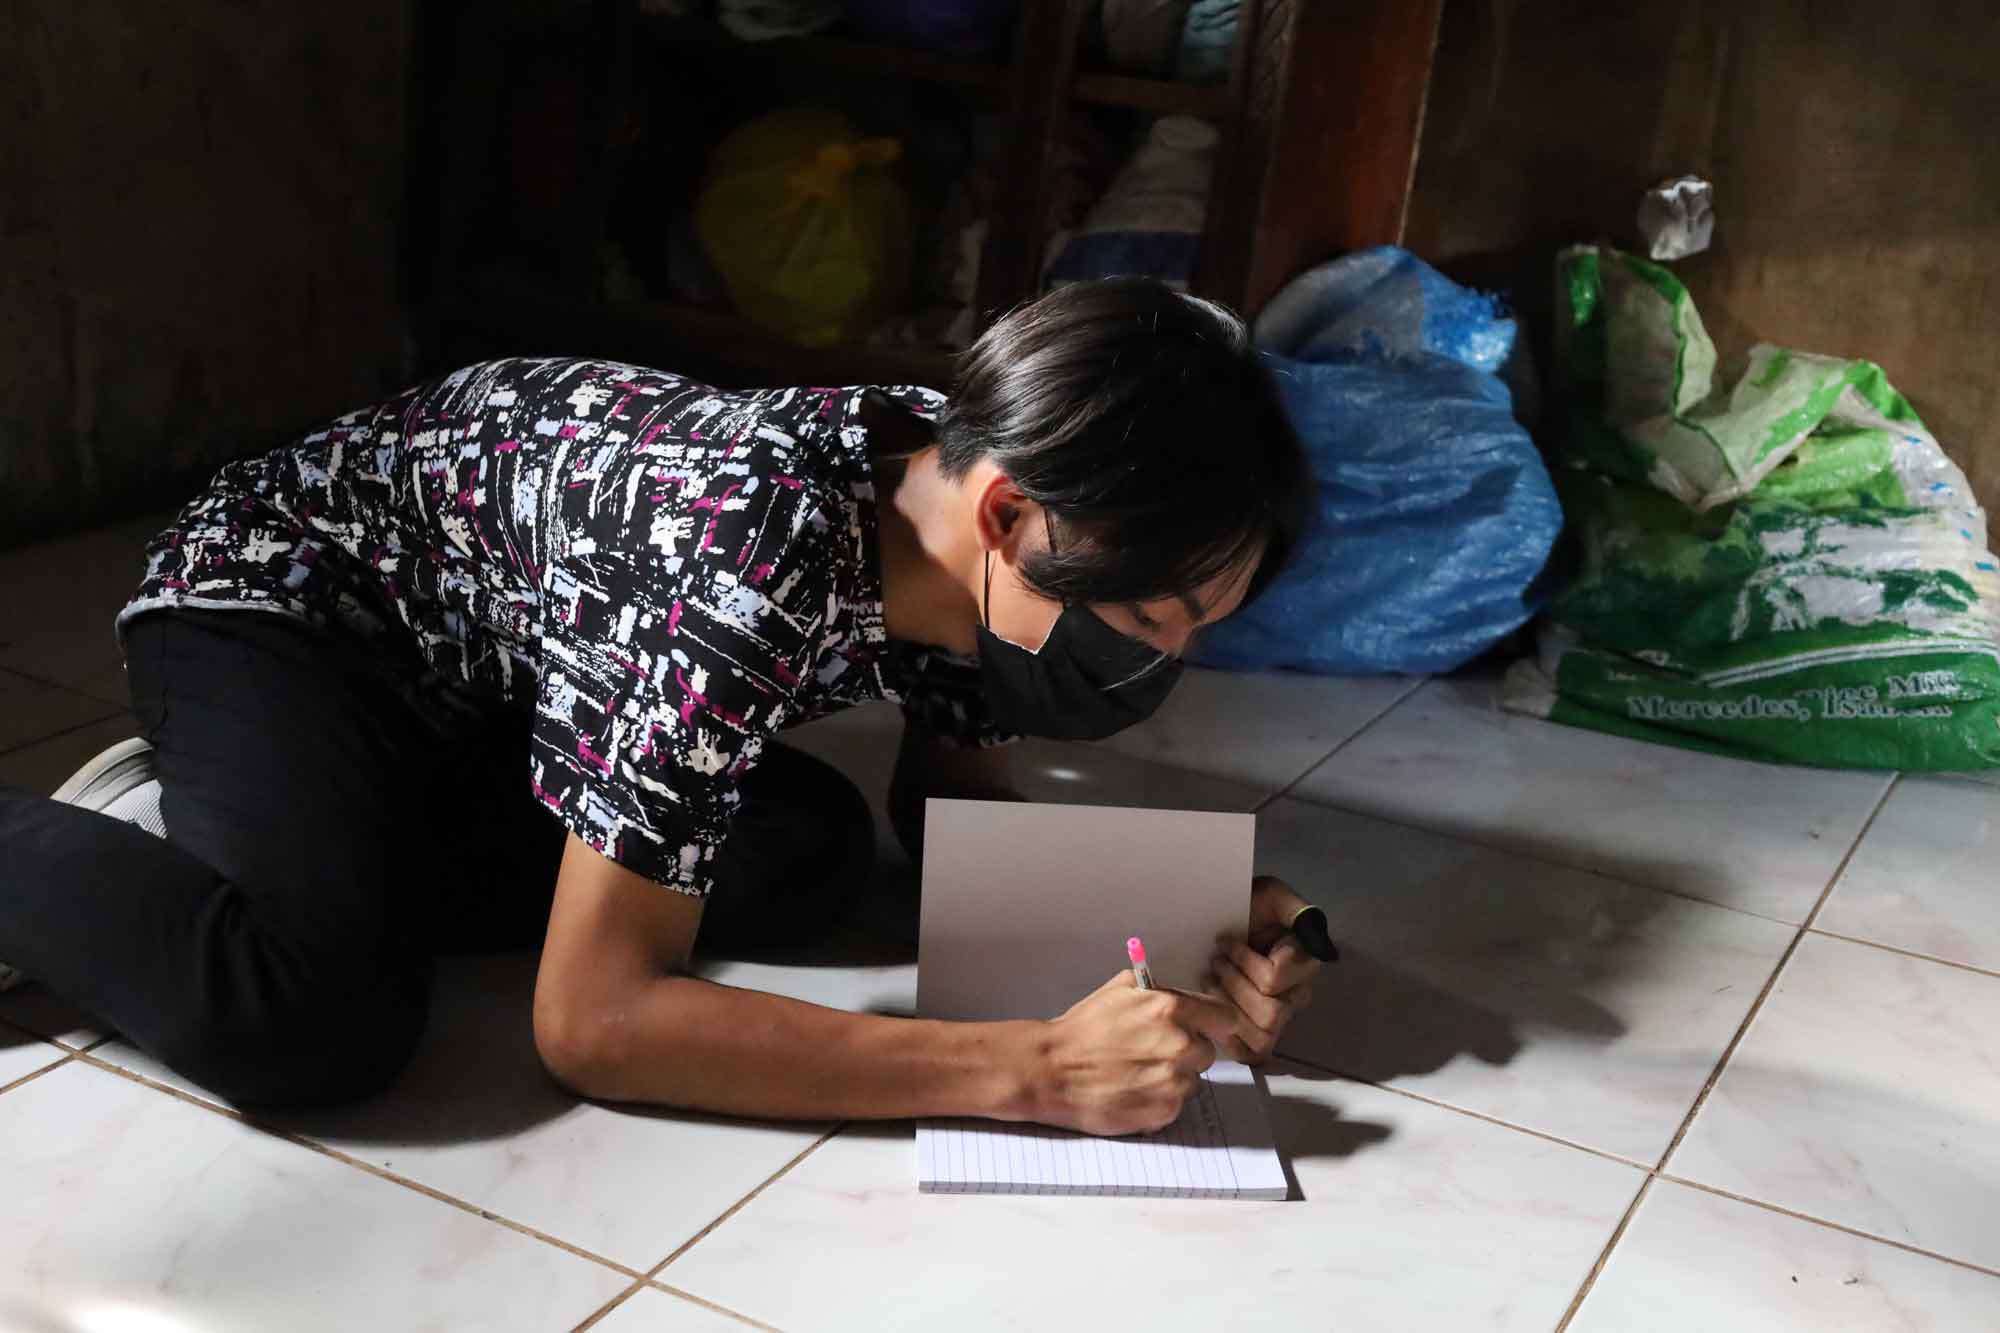 A person wearing a medical mask is seated on the ground, writing in a notebook.  